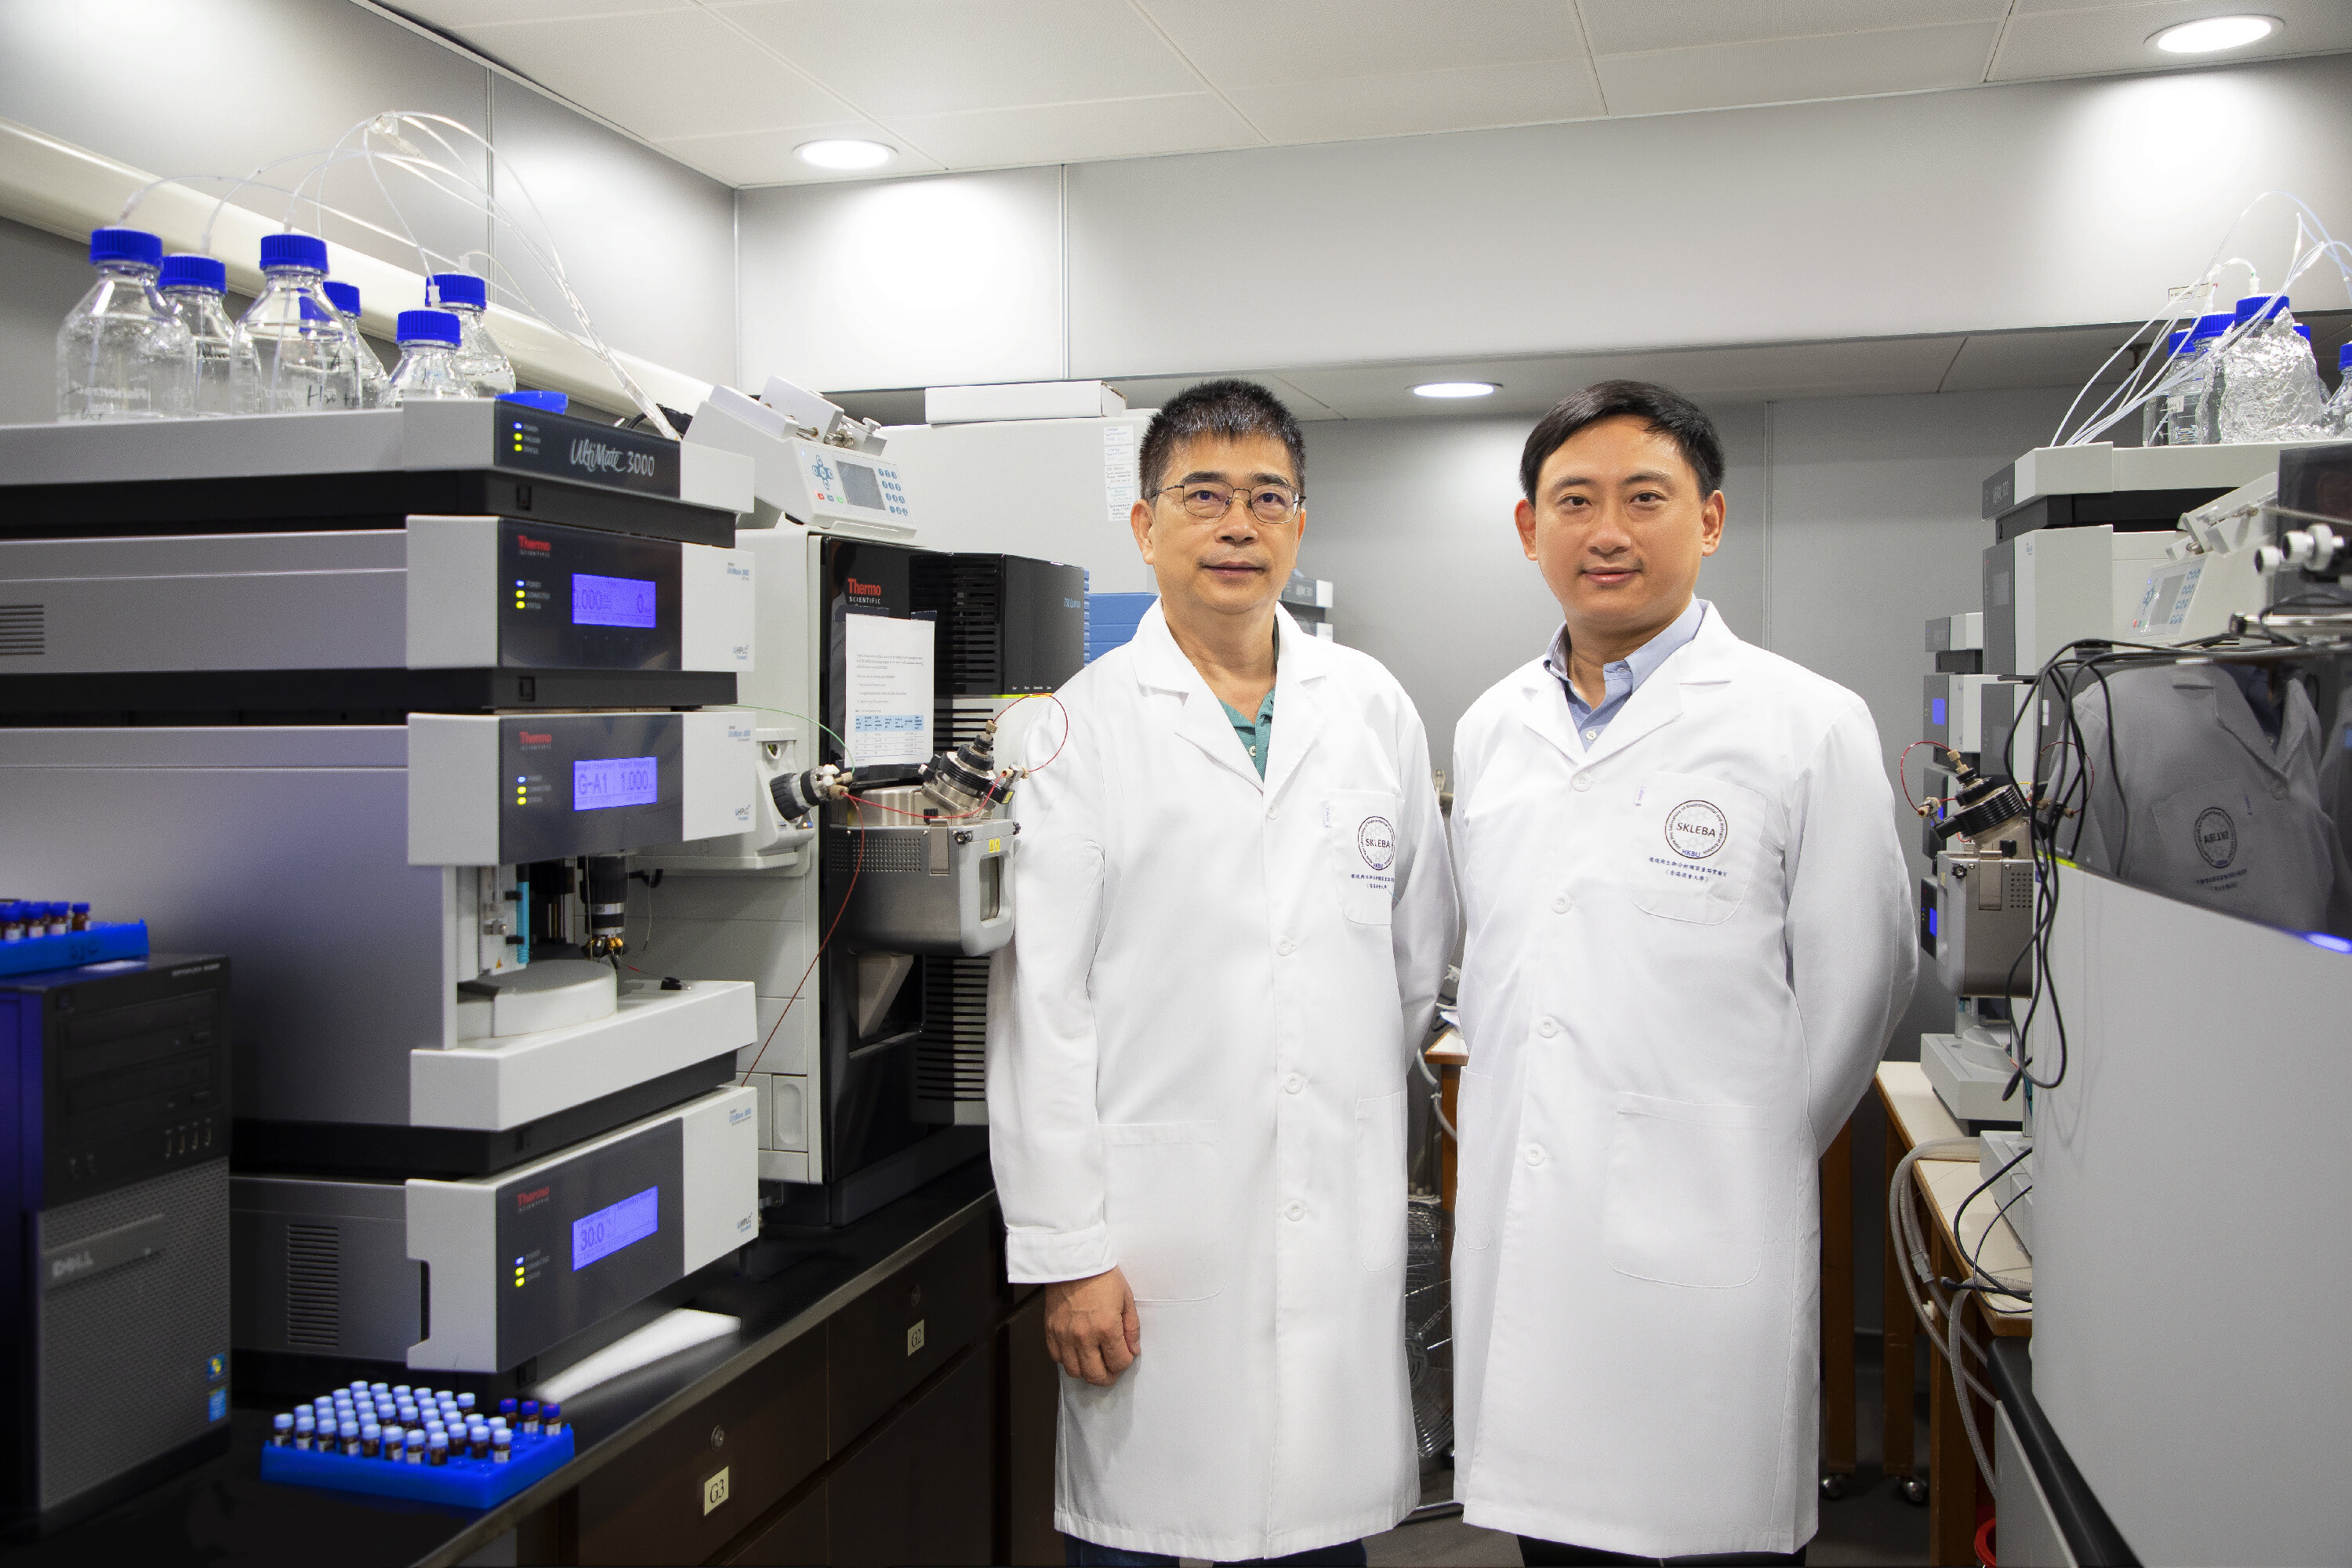 A research team led by Professor Cai Zongwei (left) and Dr Yang Zhu (right) has revealed the association between rapidly fading antibody levels in some recovered COVID-19 patients and a high plasma concentration of a metabolite called gly-pro and its producing enzyme.